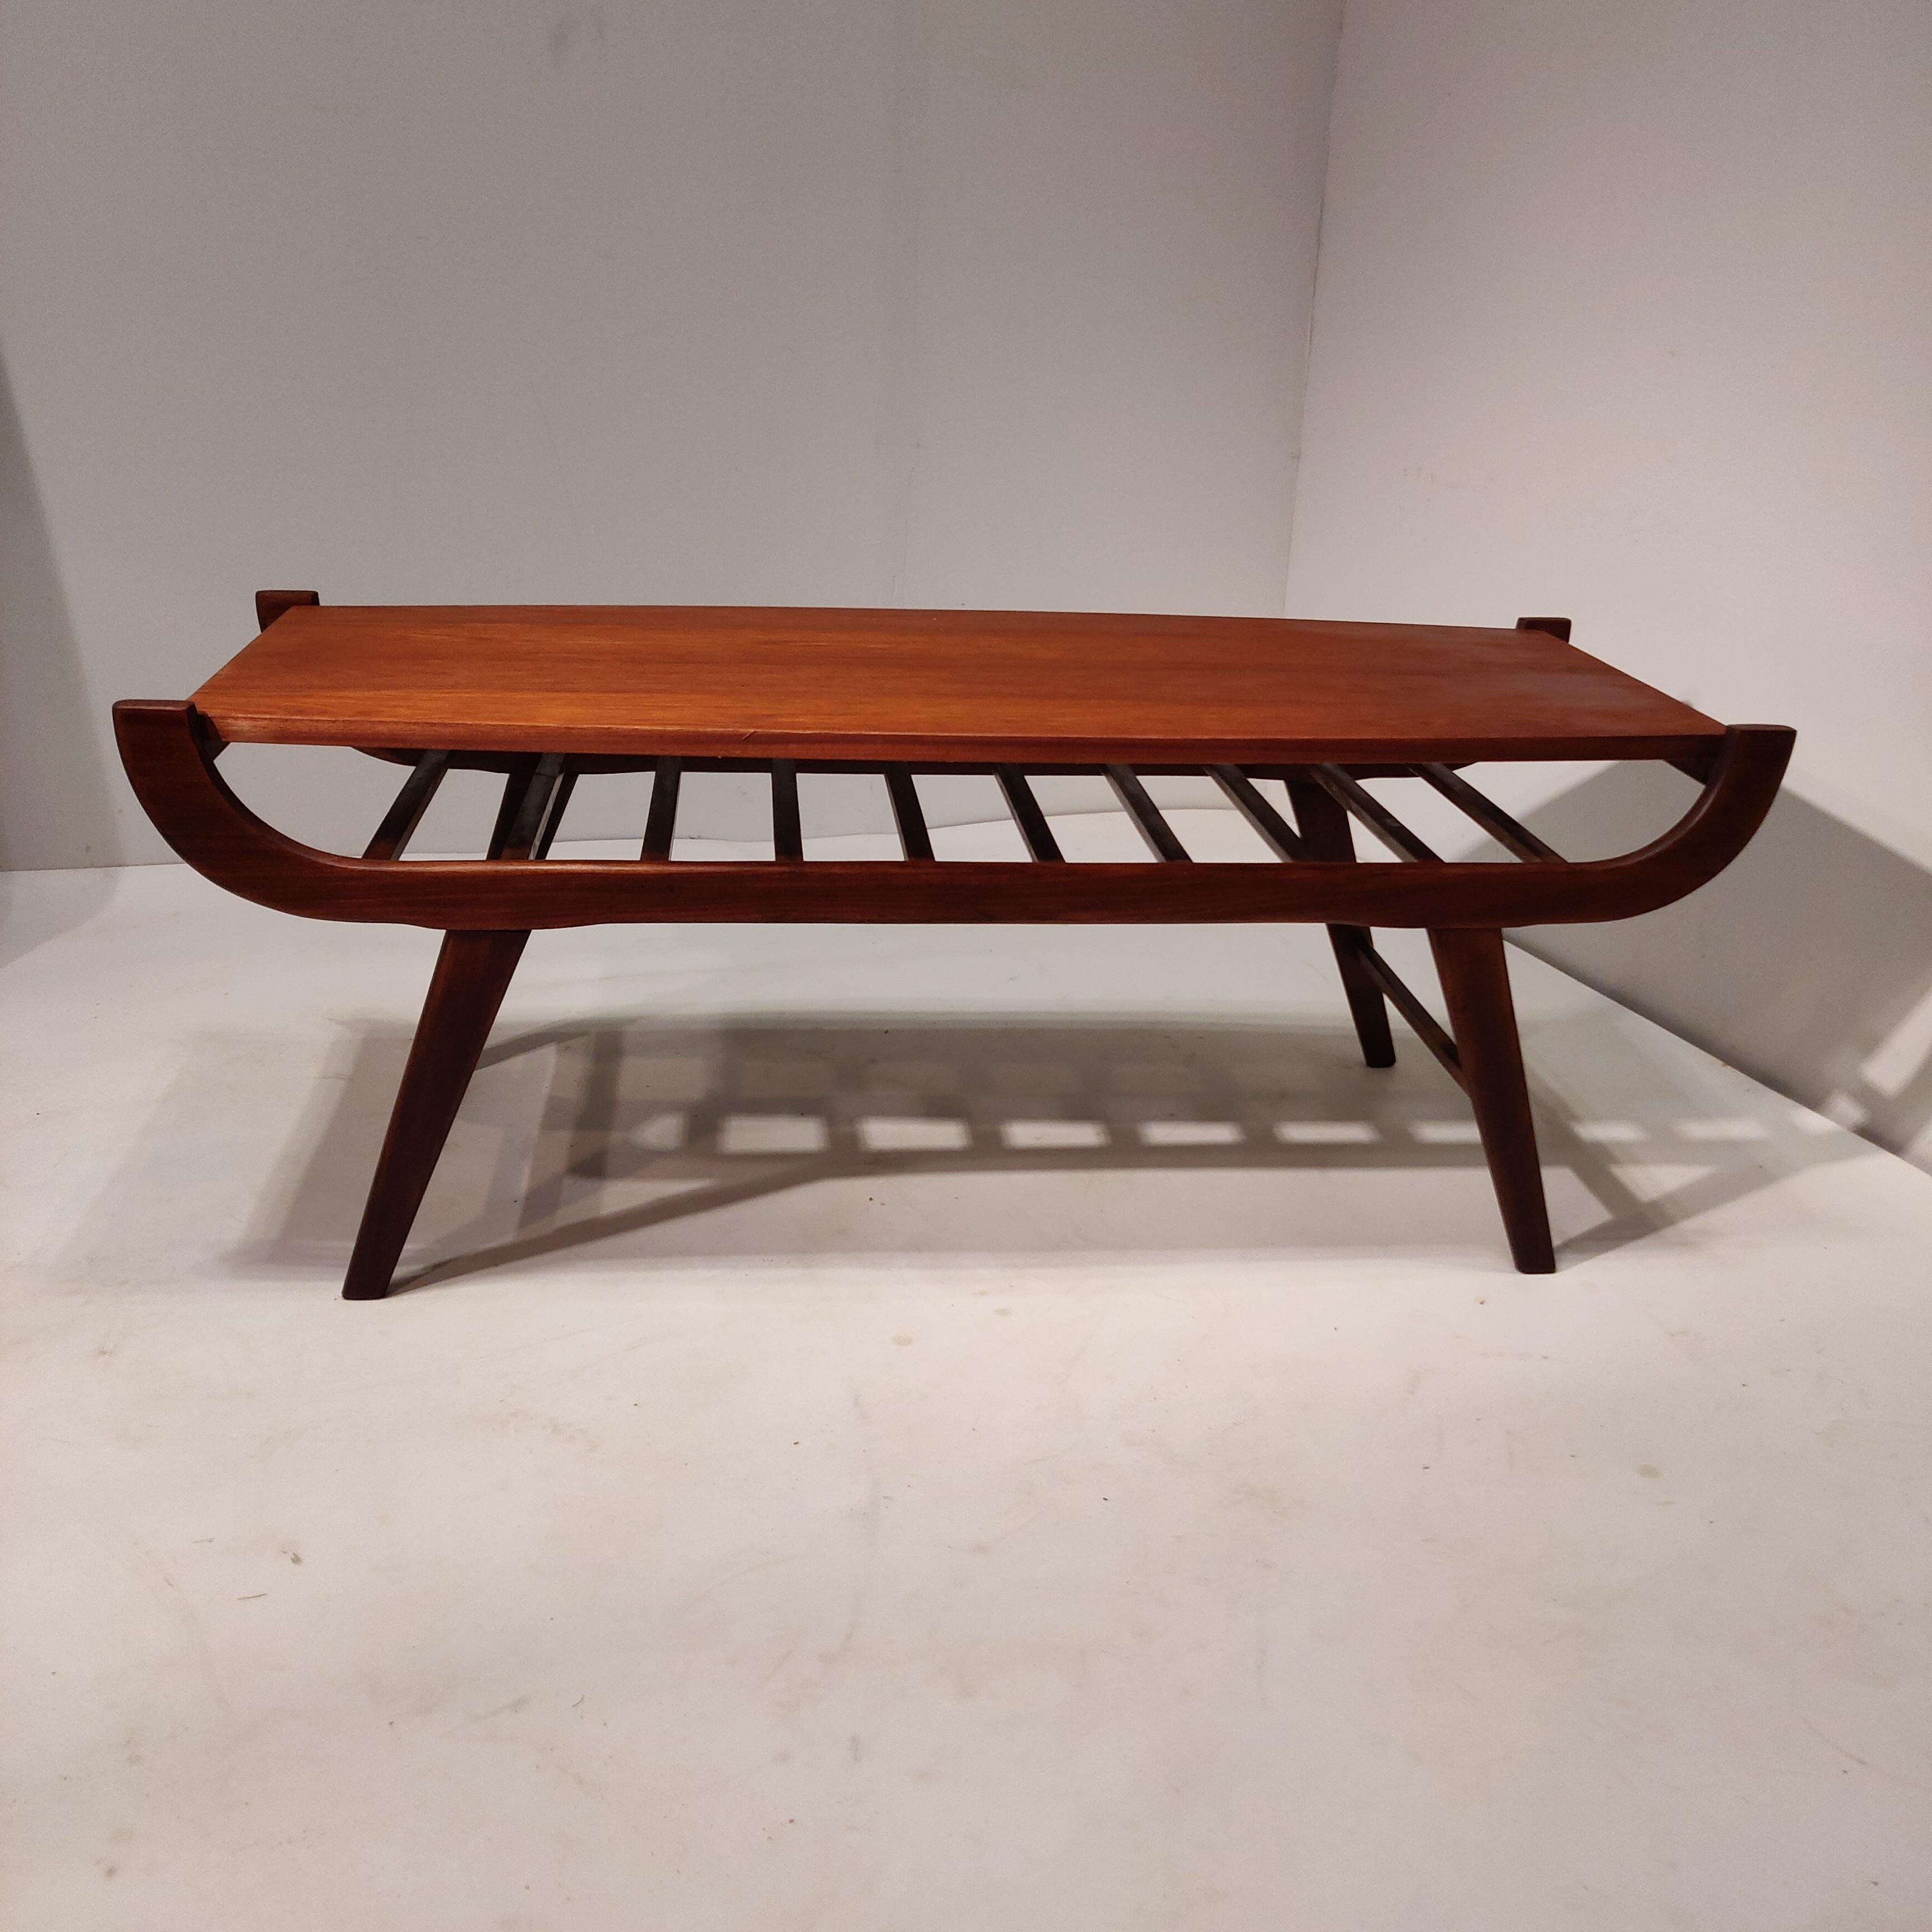 European Mid Century Modern Coffee Table with Turnable Top, 1960s For Sale